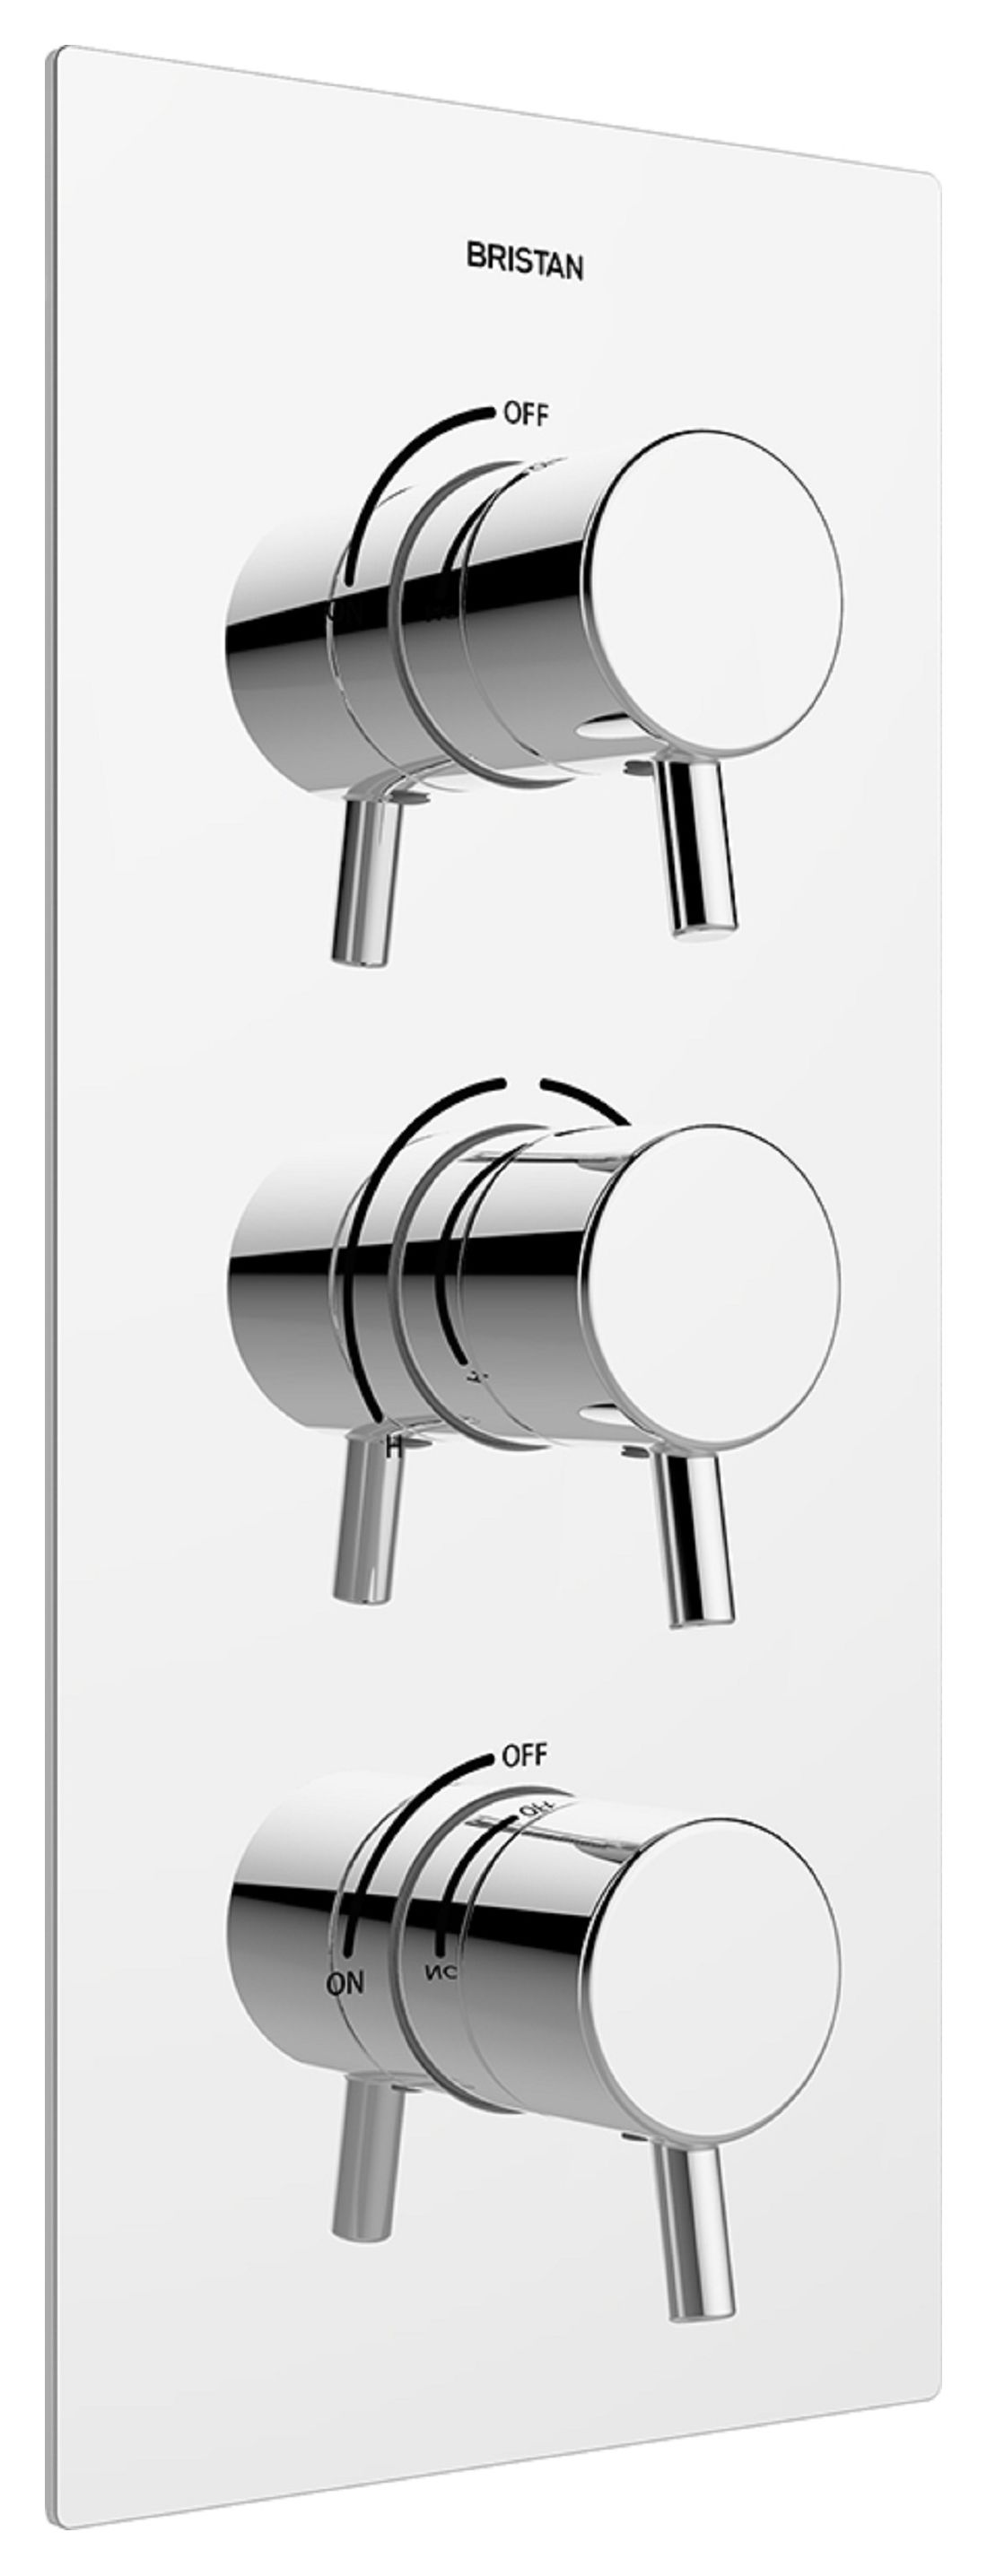 Image of Bristan Prism Recessed Thermostatic Dual Control Shower Valve with 2 Integral Stopcocks - Chrome